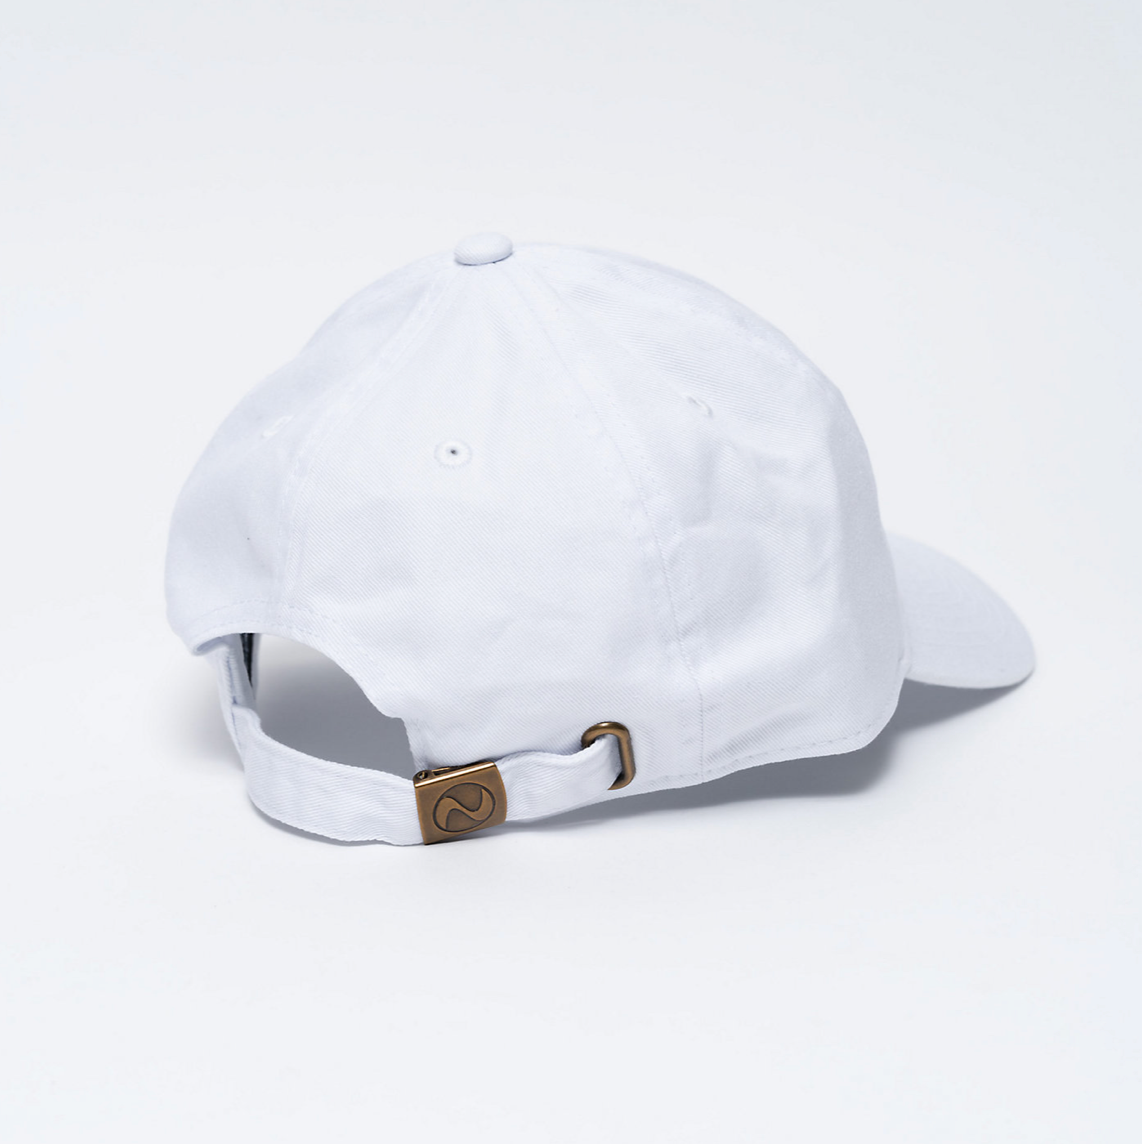 【Preorder】Snoopy in Ginza Exhibition- SNOOPY'S SURF SHOP Shark Attack Cap